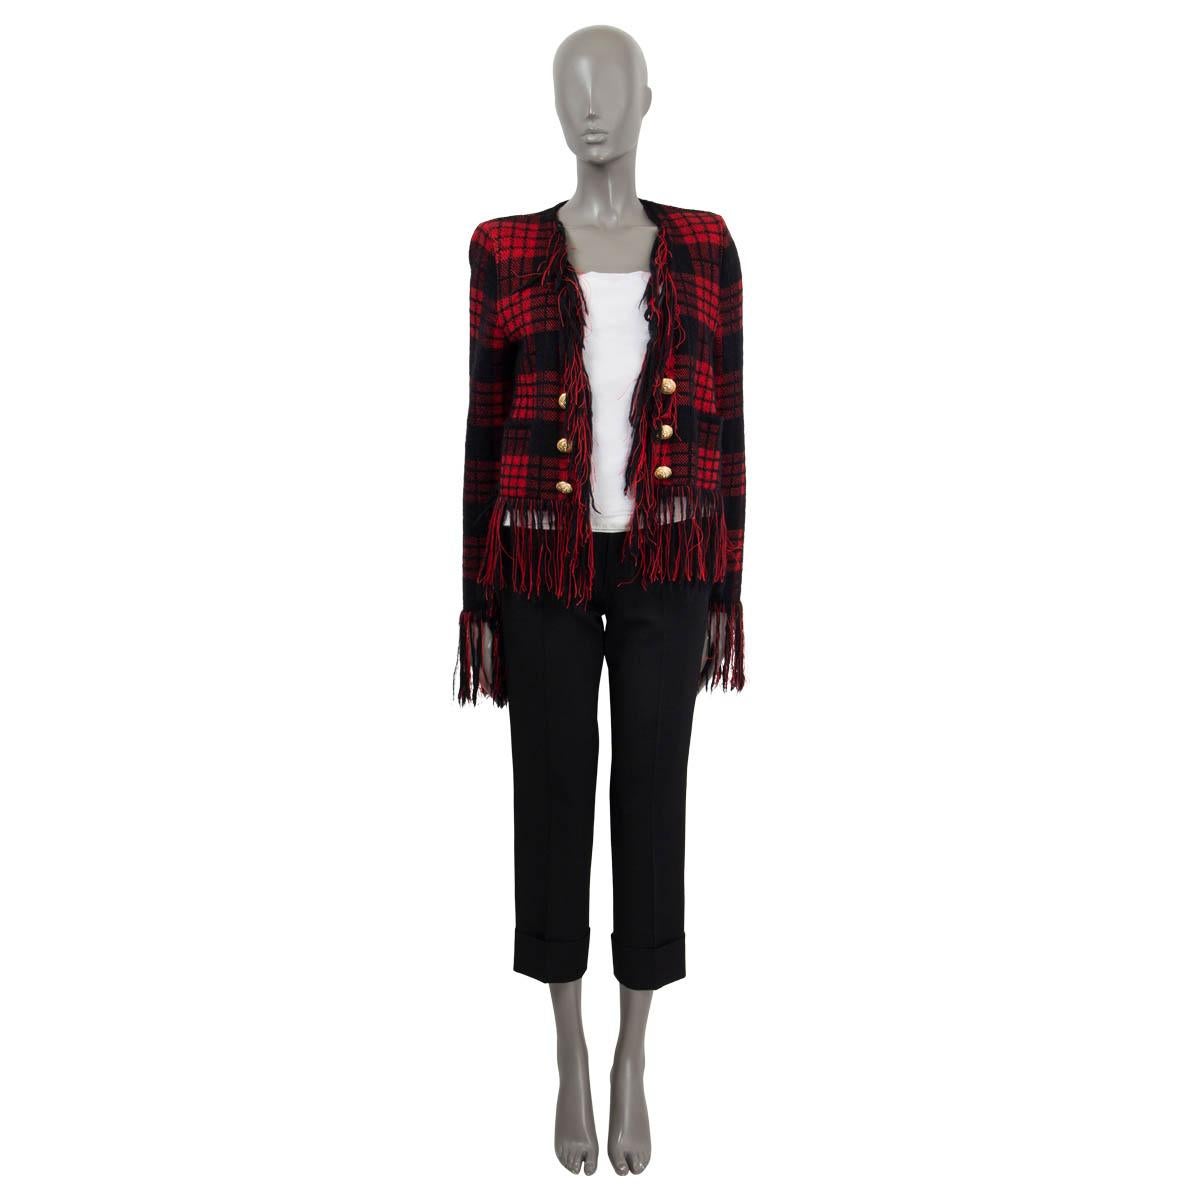 100% authentic Balmain open knit jacket in black and red mohair (30%), wool (29%), viscose (28%) and polyamide (13%). Features a fringed hemline and cuffs. Has padded shoulders, two front patch pockets and six Balmain signature buttons on the front.